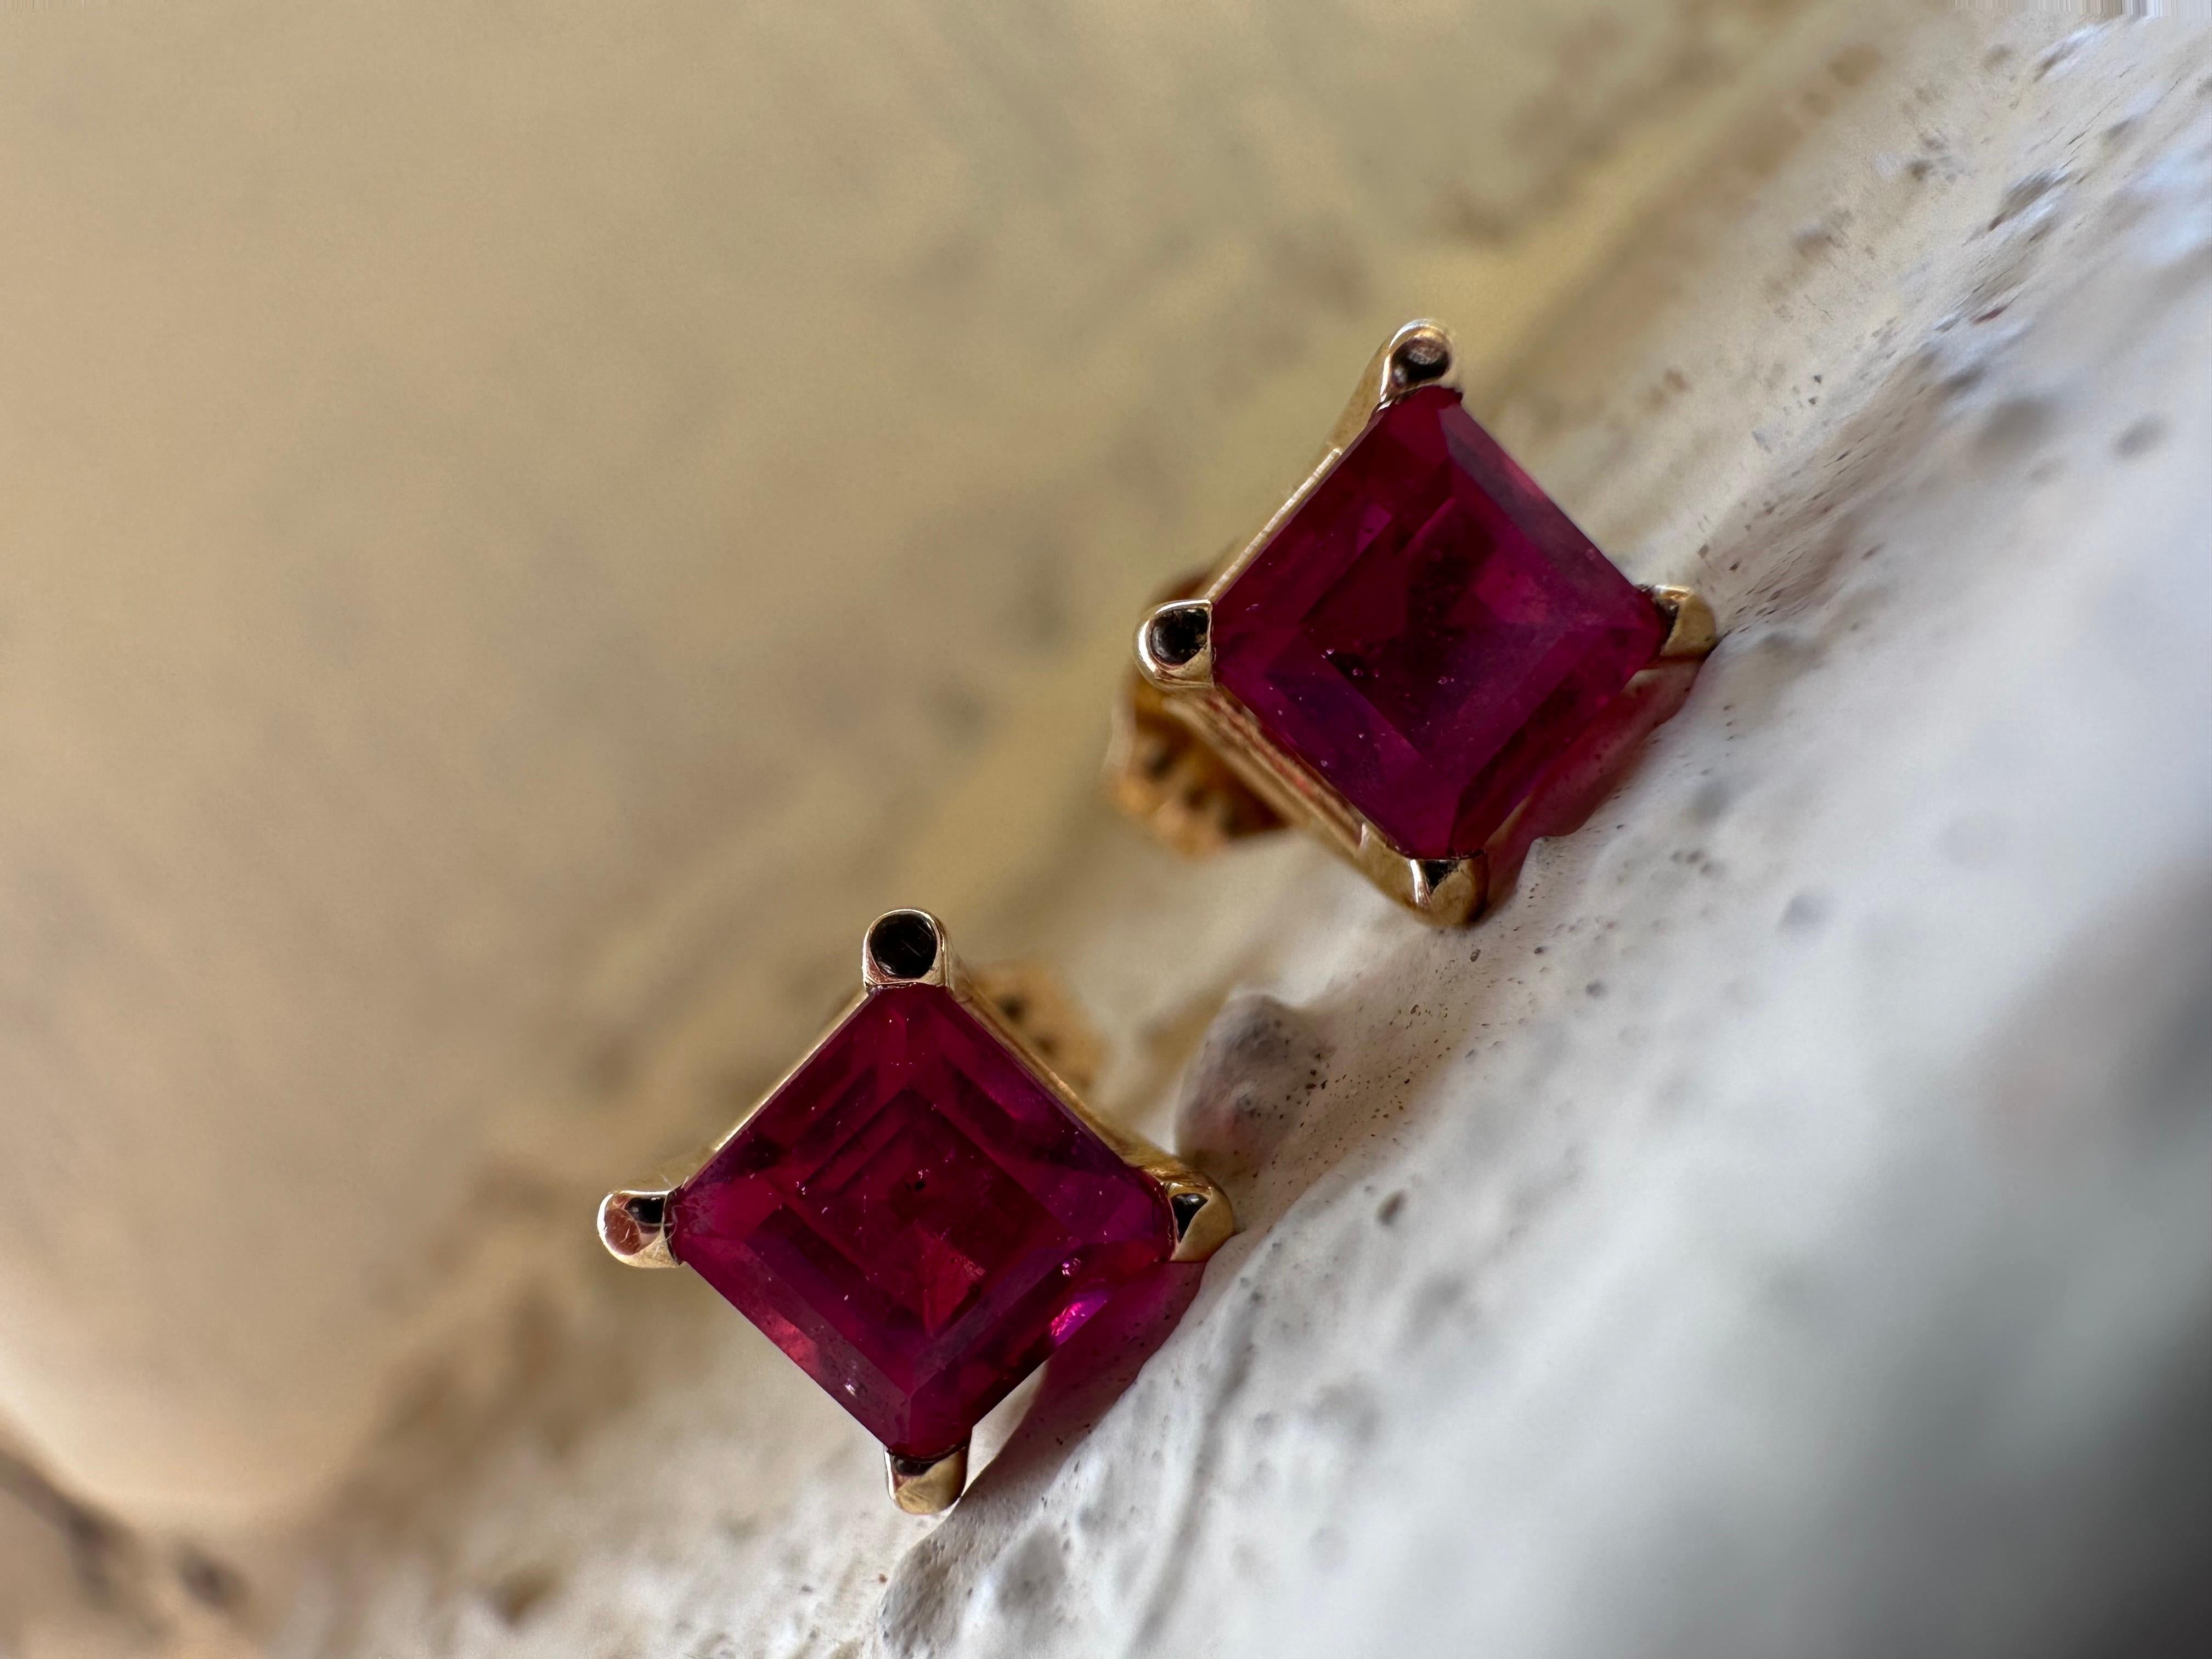 Ruby studs in 14KT rose gold, beautiful finished on the studs.
Metal Type: 14KT
Natural Ruby(s):
Color: Pinkish Red
Cut:Princess
Carat: 1.00ct (5mm)
Clarity: Slightly Included (clarity enhanced)

Certificate of authenticity comes with